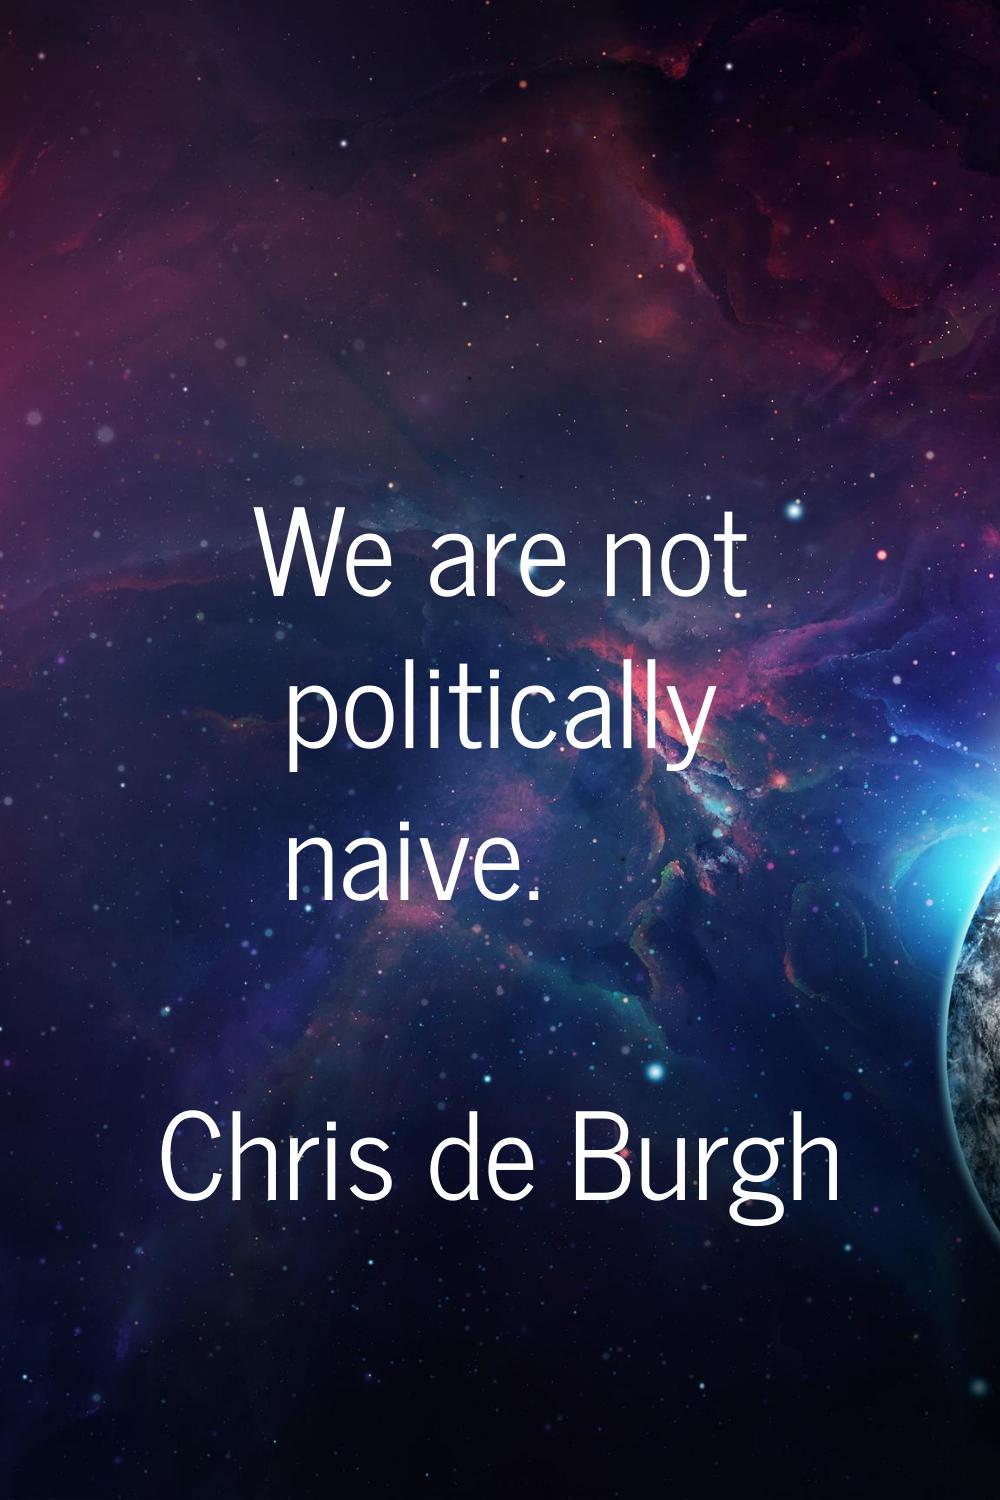 We are not politically naive.